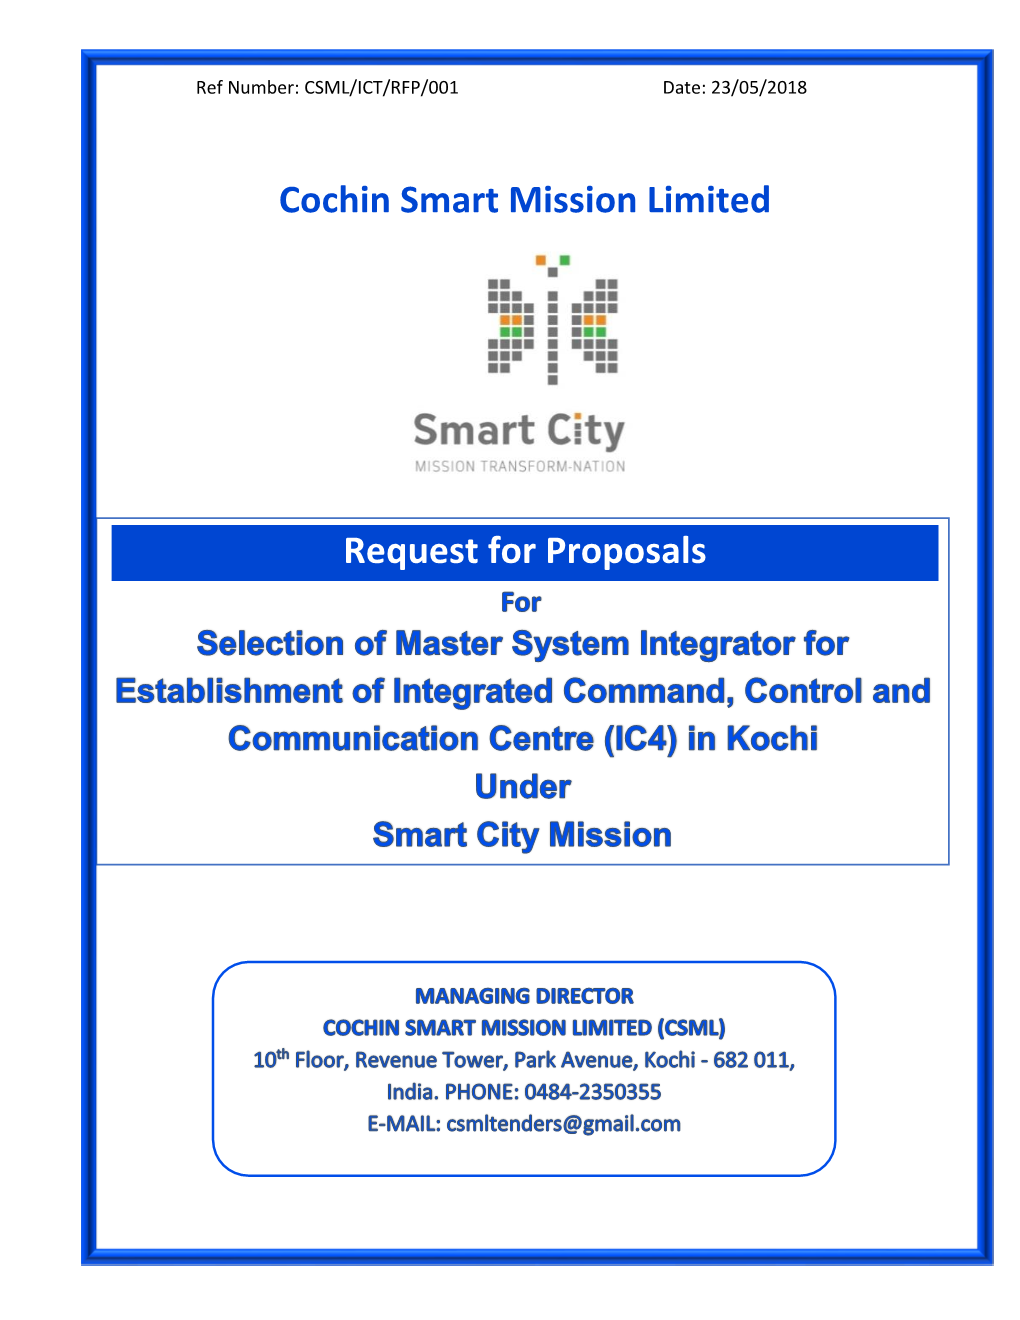 Cochin Smart Mission Limited Request for Proposals